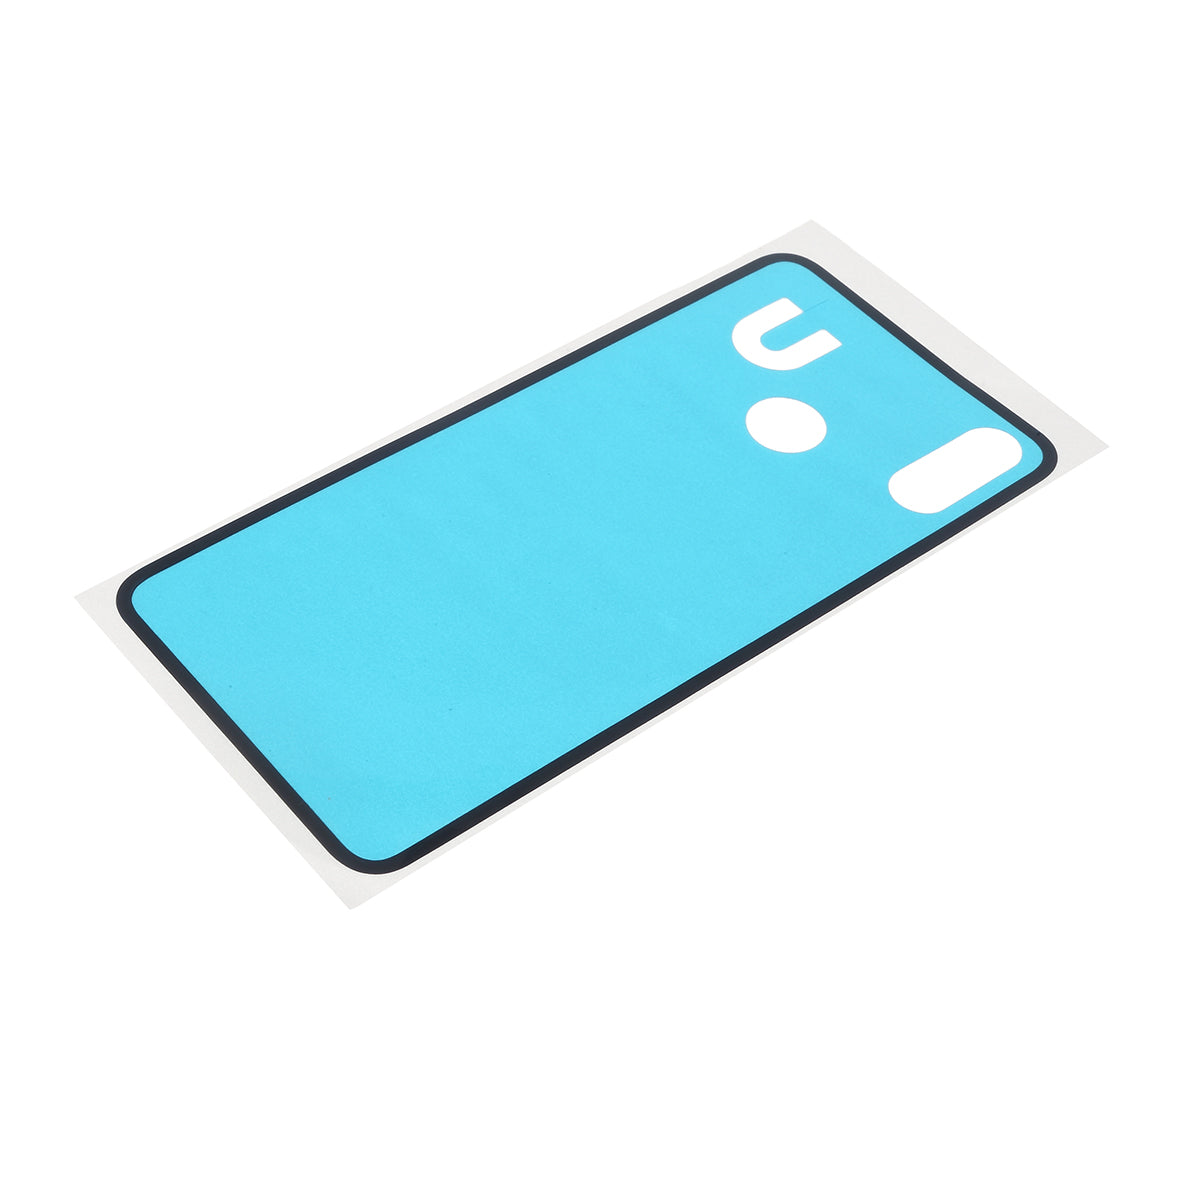 Battery Door Cover Adhesive Sticker for Huawei P30 Lite